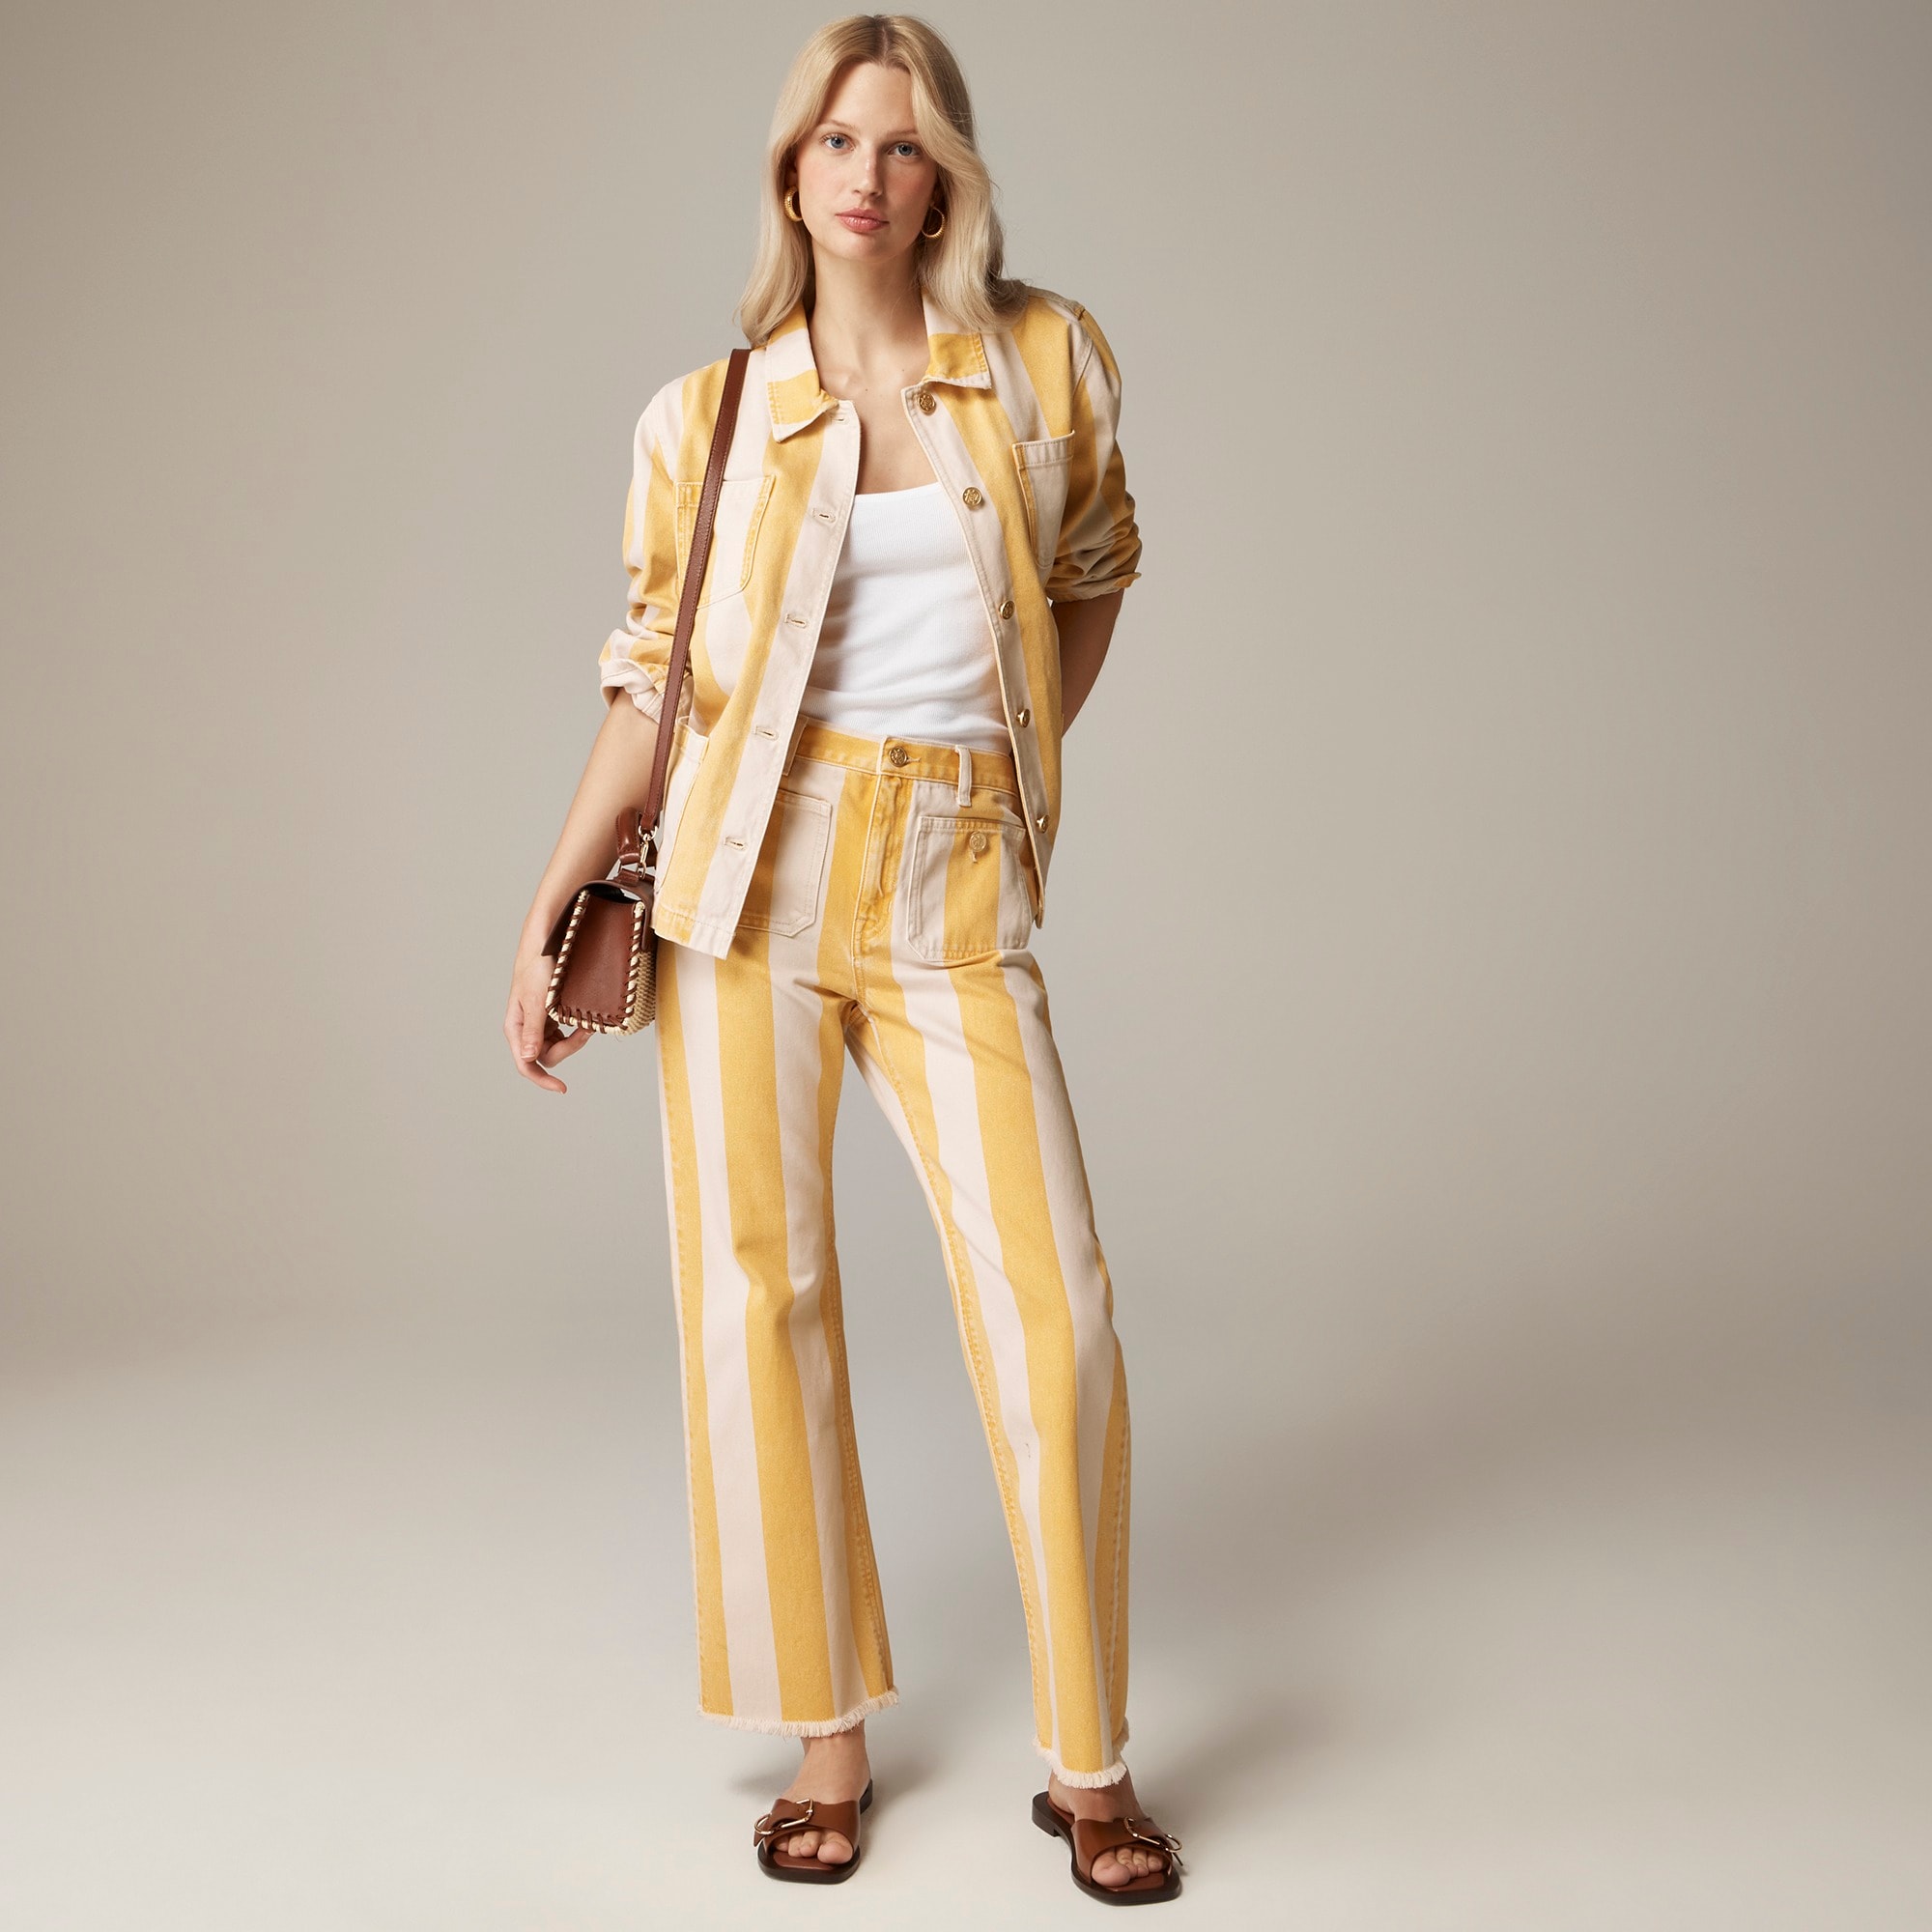  Petite sailor mid-rise relaxed demi-boot jean in sunflower stripe